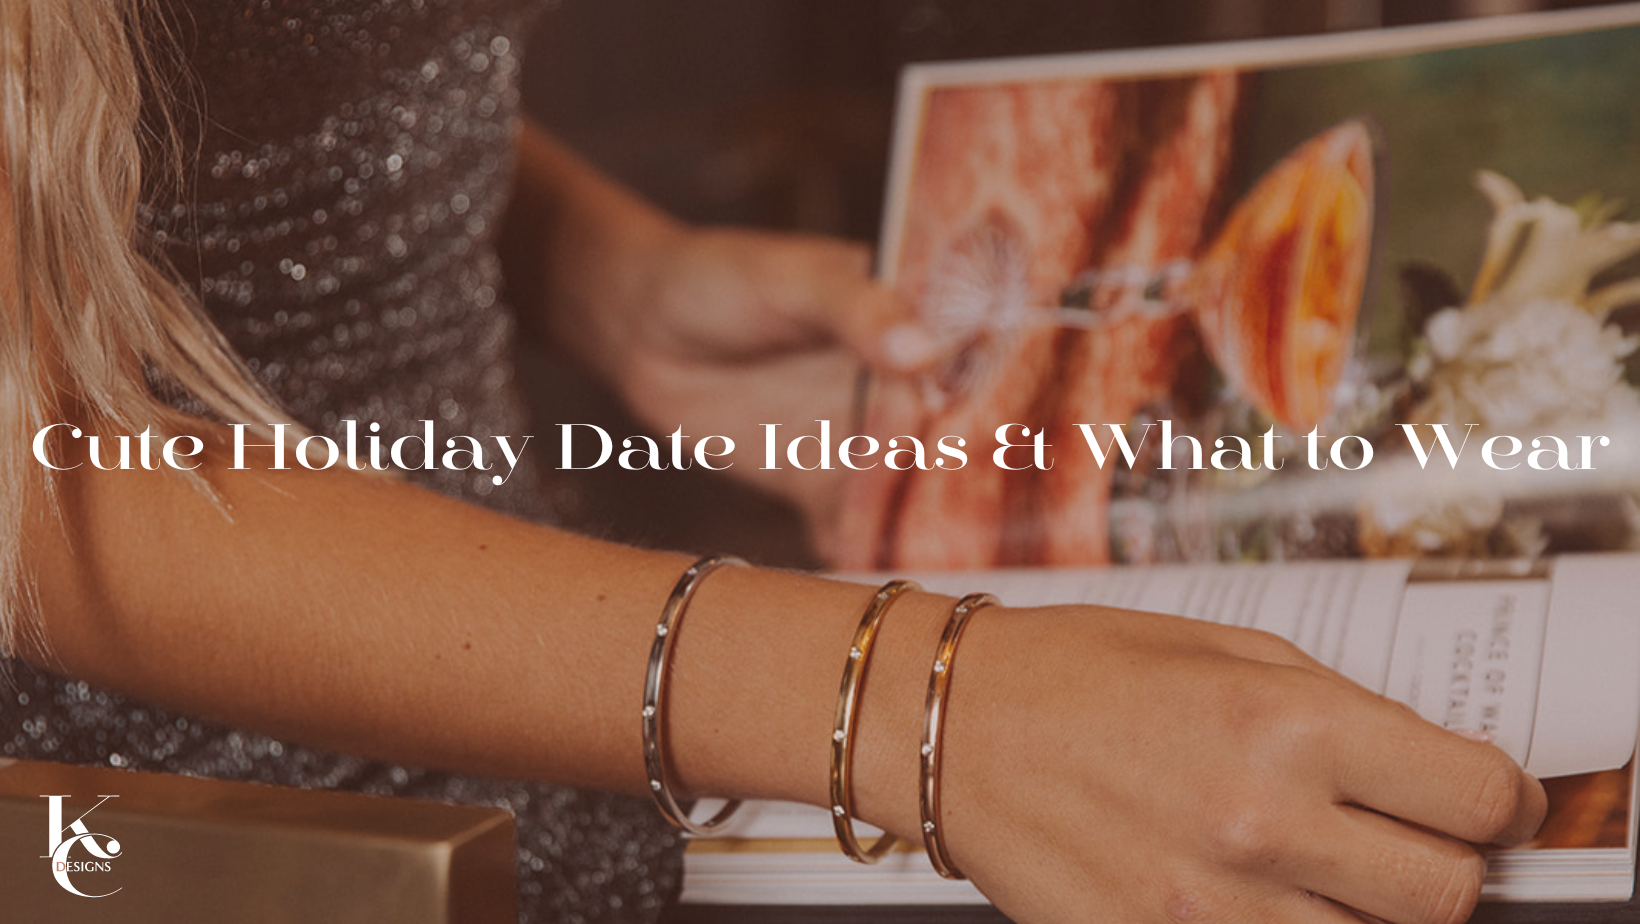 Cute Holiday Date Ideas & What to Wear